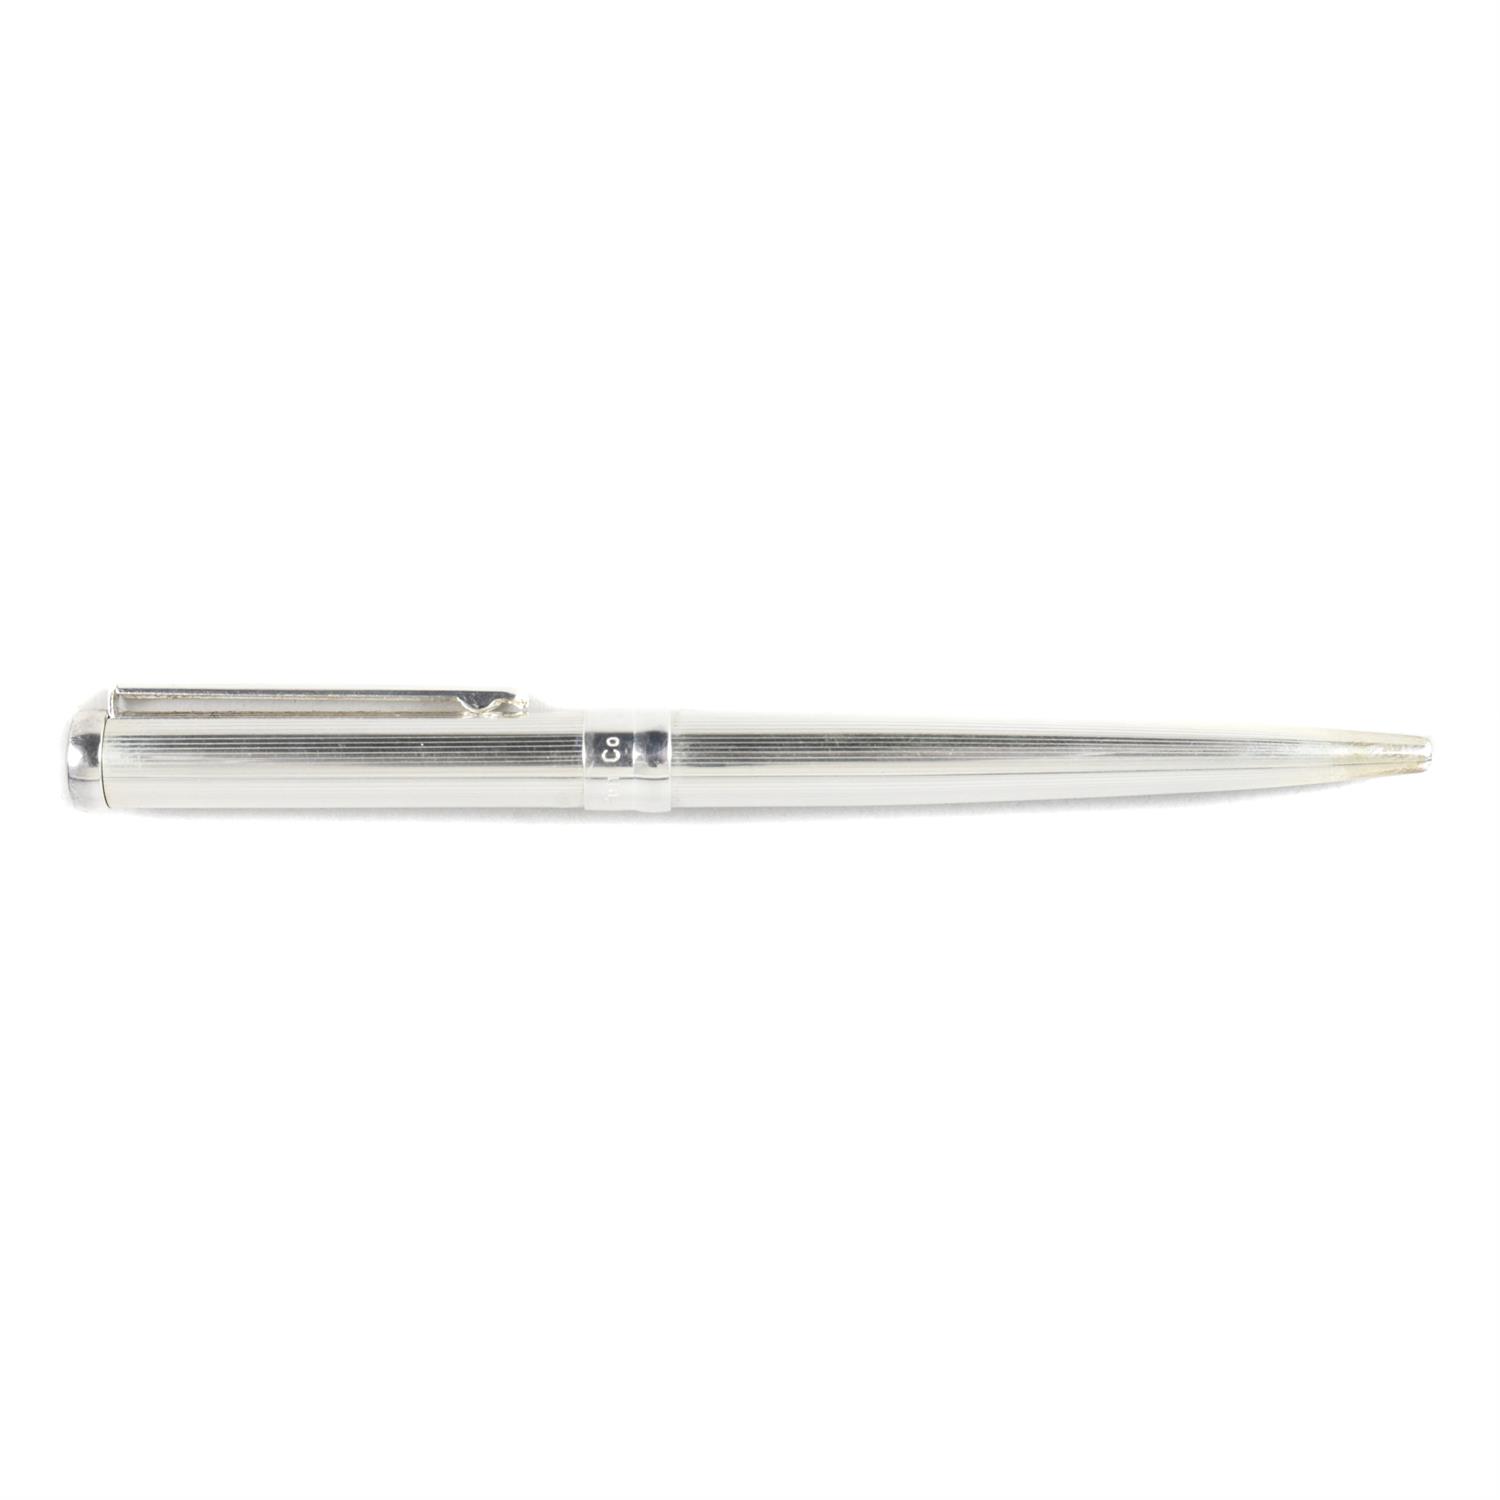 Three sterling silver Icon Pen pens - Image 2 of 3